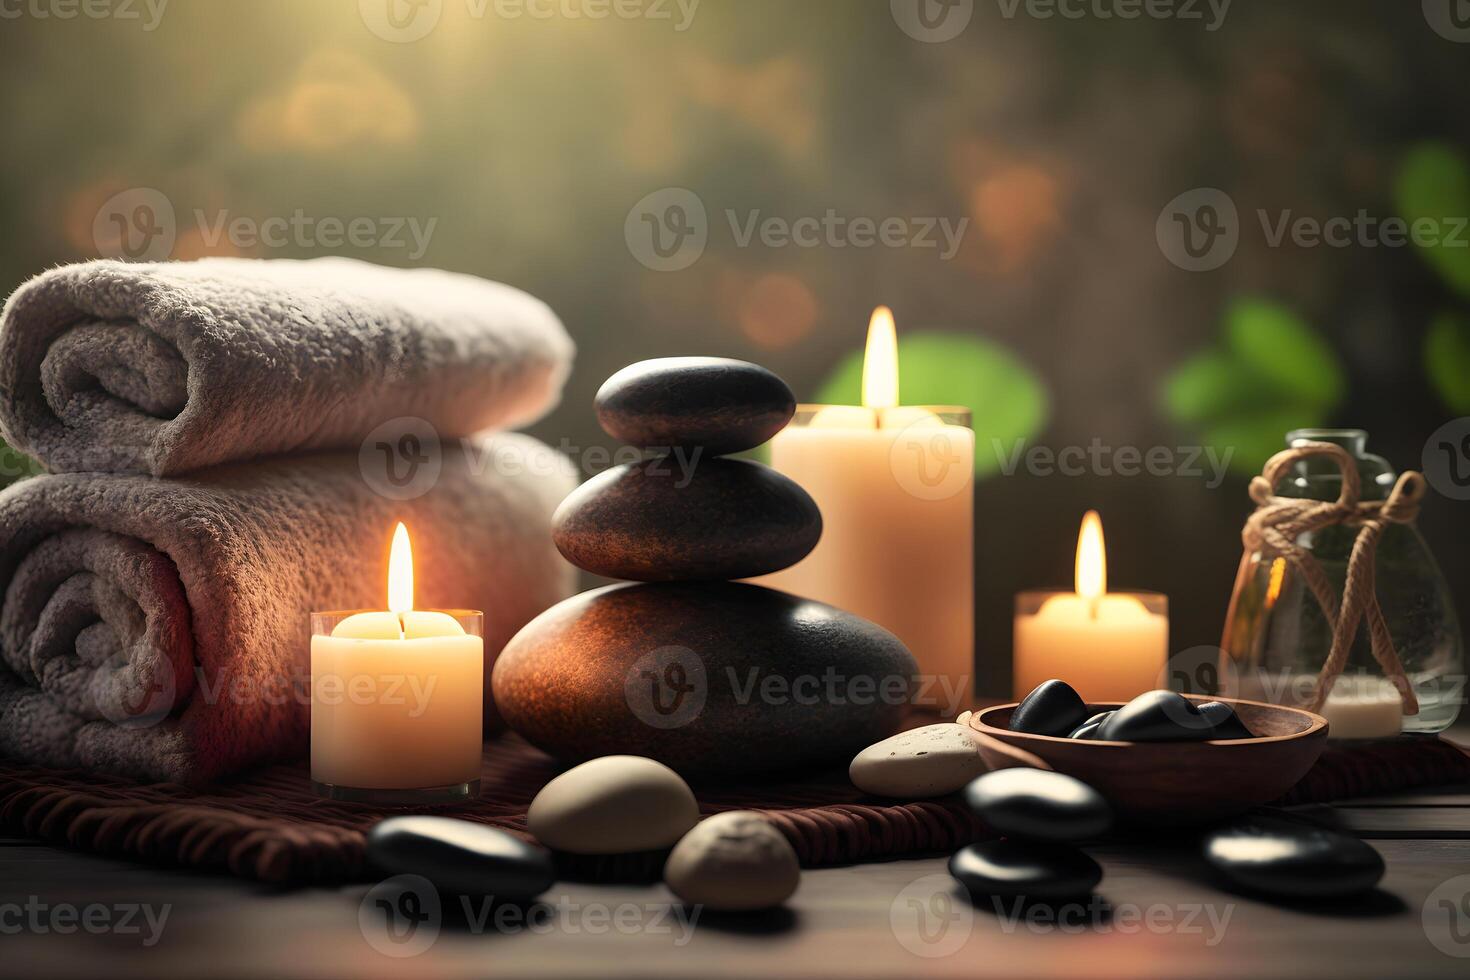 https://static.vecteezy.com/system/resources/previews/023/009/052/non_2x/beauty-spa-treatment-and-relax-concept-hot-stone-massage-setting-lit-by-candles-neural-network-ai-generated-photo.jpg